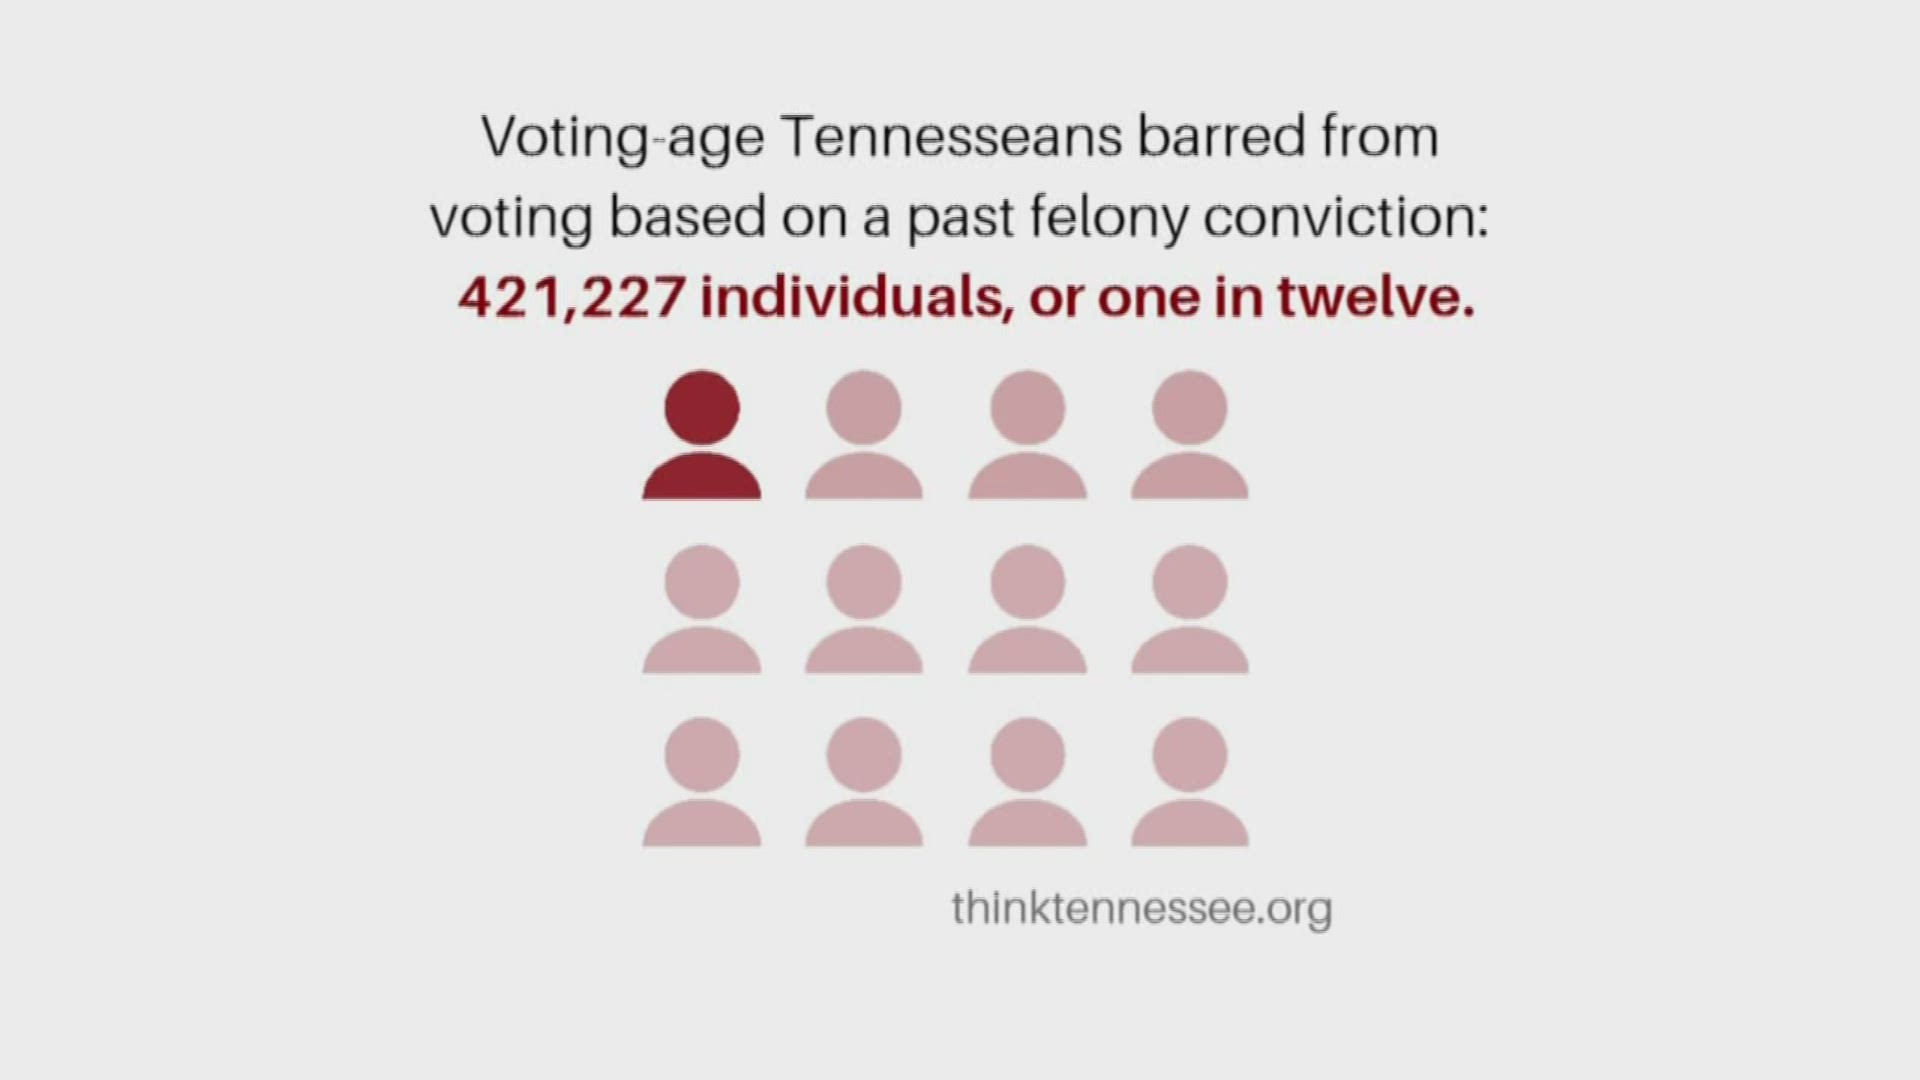 ThinkTennessee says nearly 3 million Americans regained their right to vote between 1997 and 2018. In the same report, it points out what voting rights restoration looks like right here in Tennessee